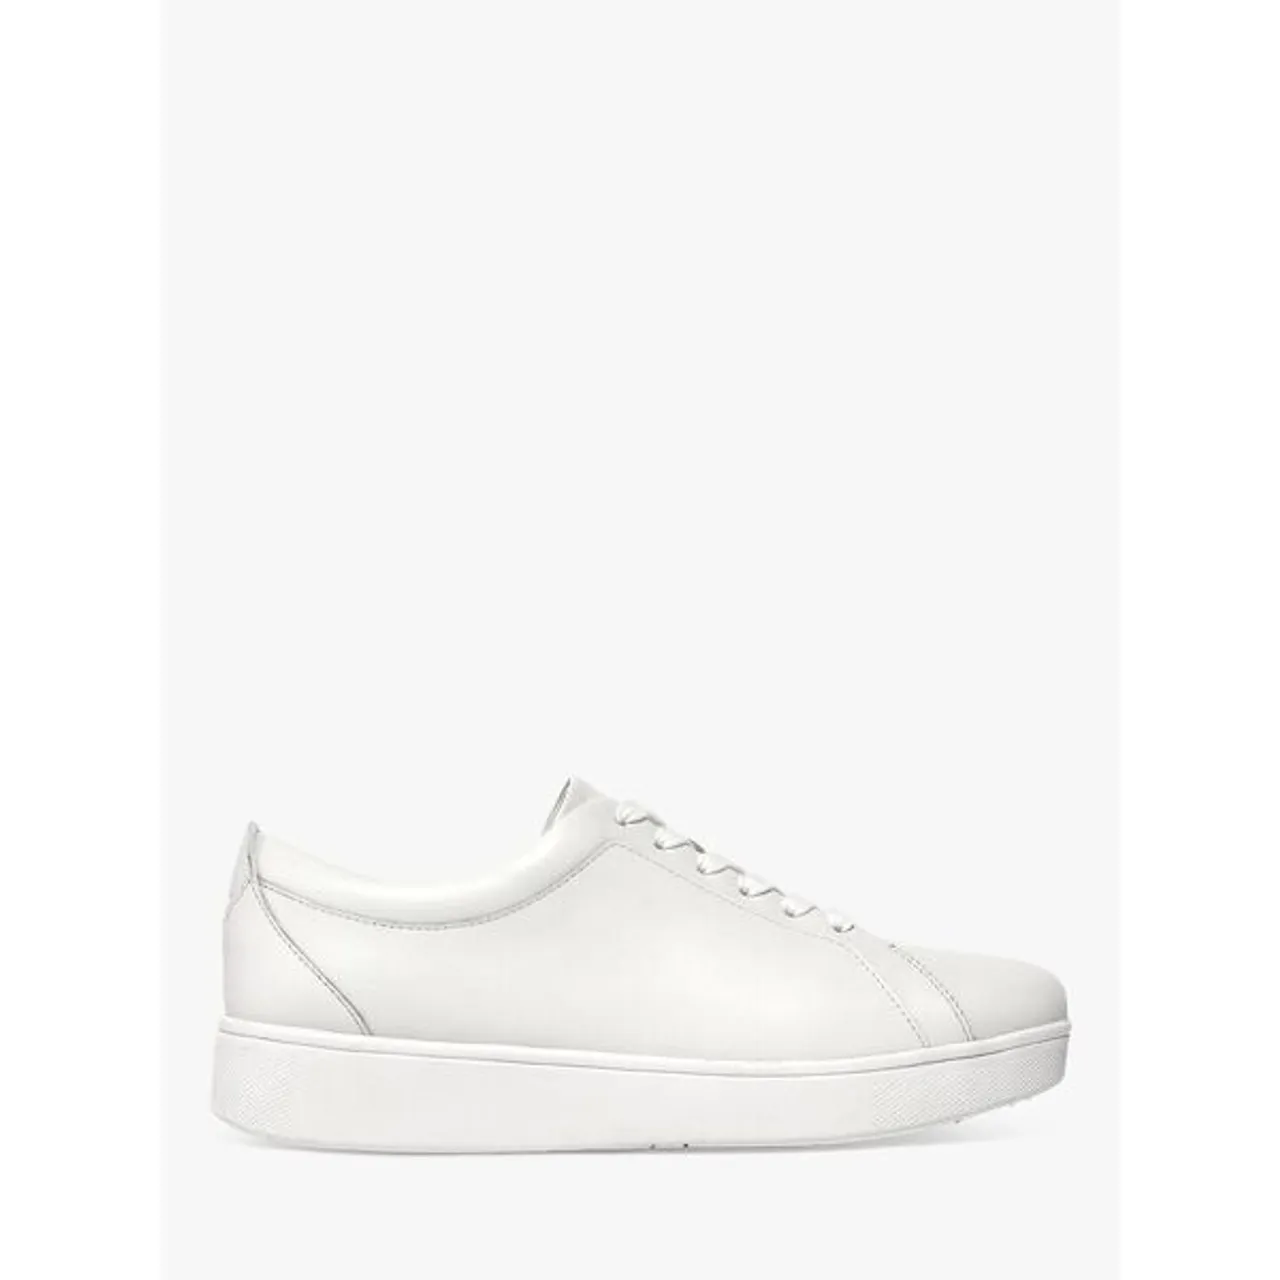 FitFlop Rally Lace Up Leather Trainers - Urban White - Female